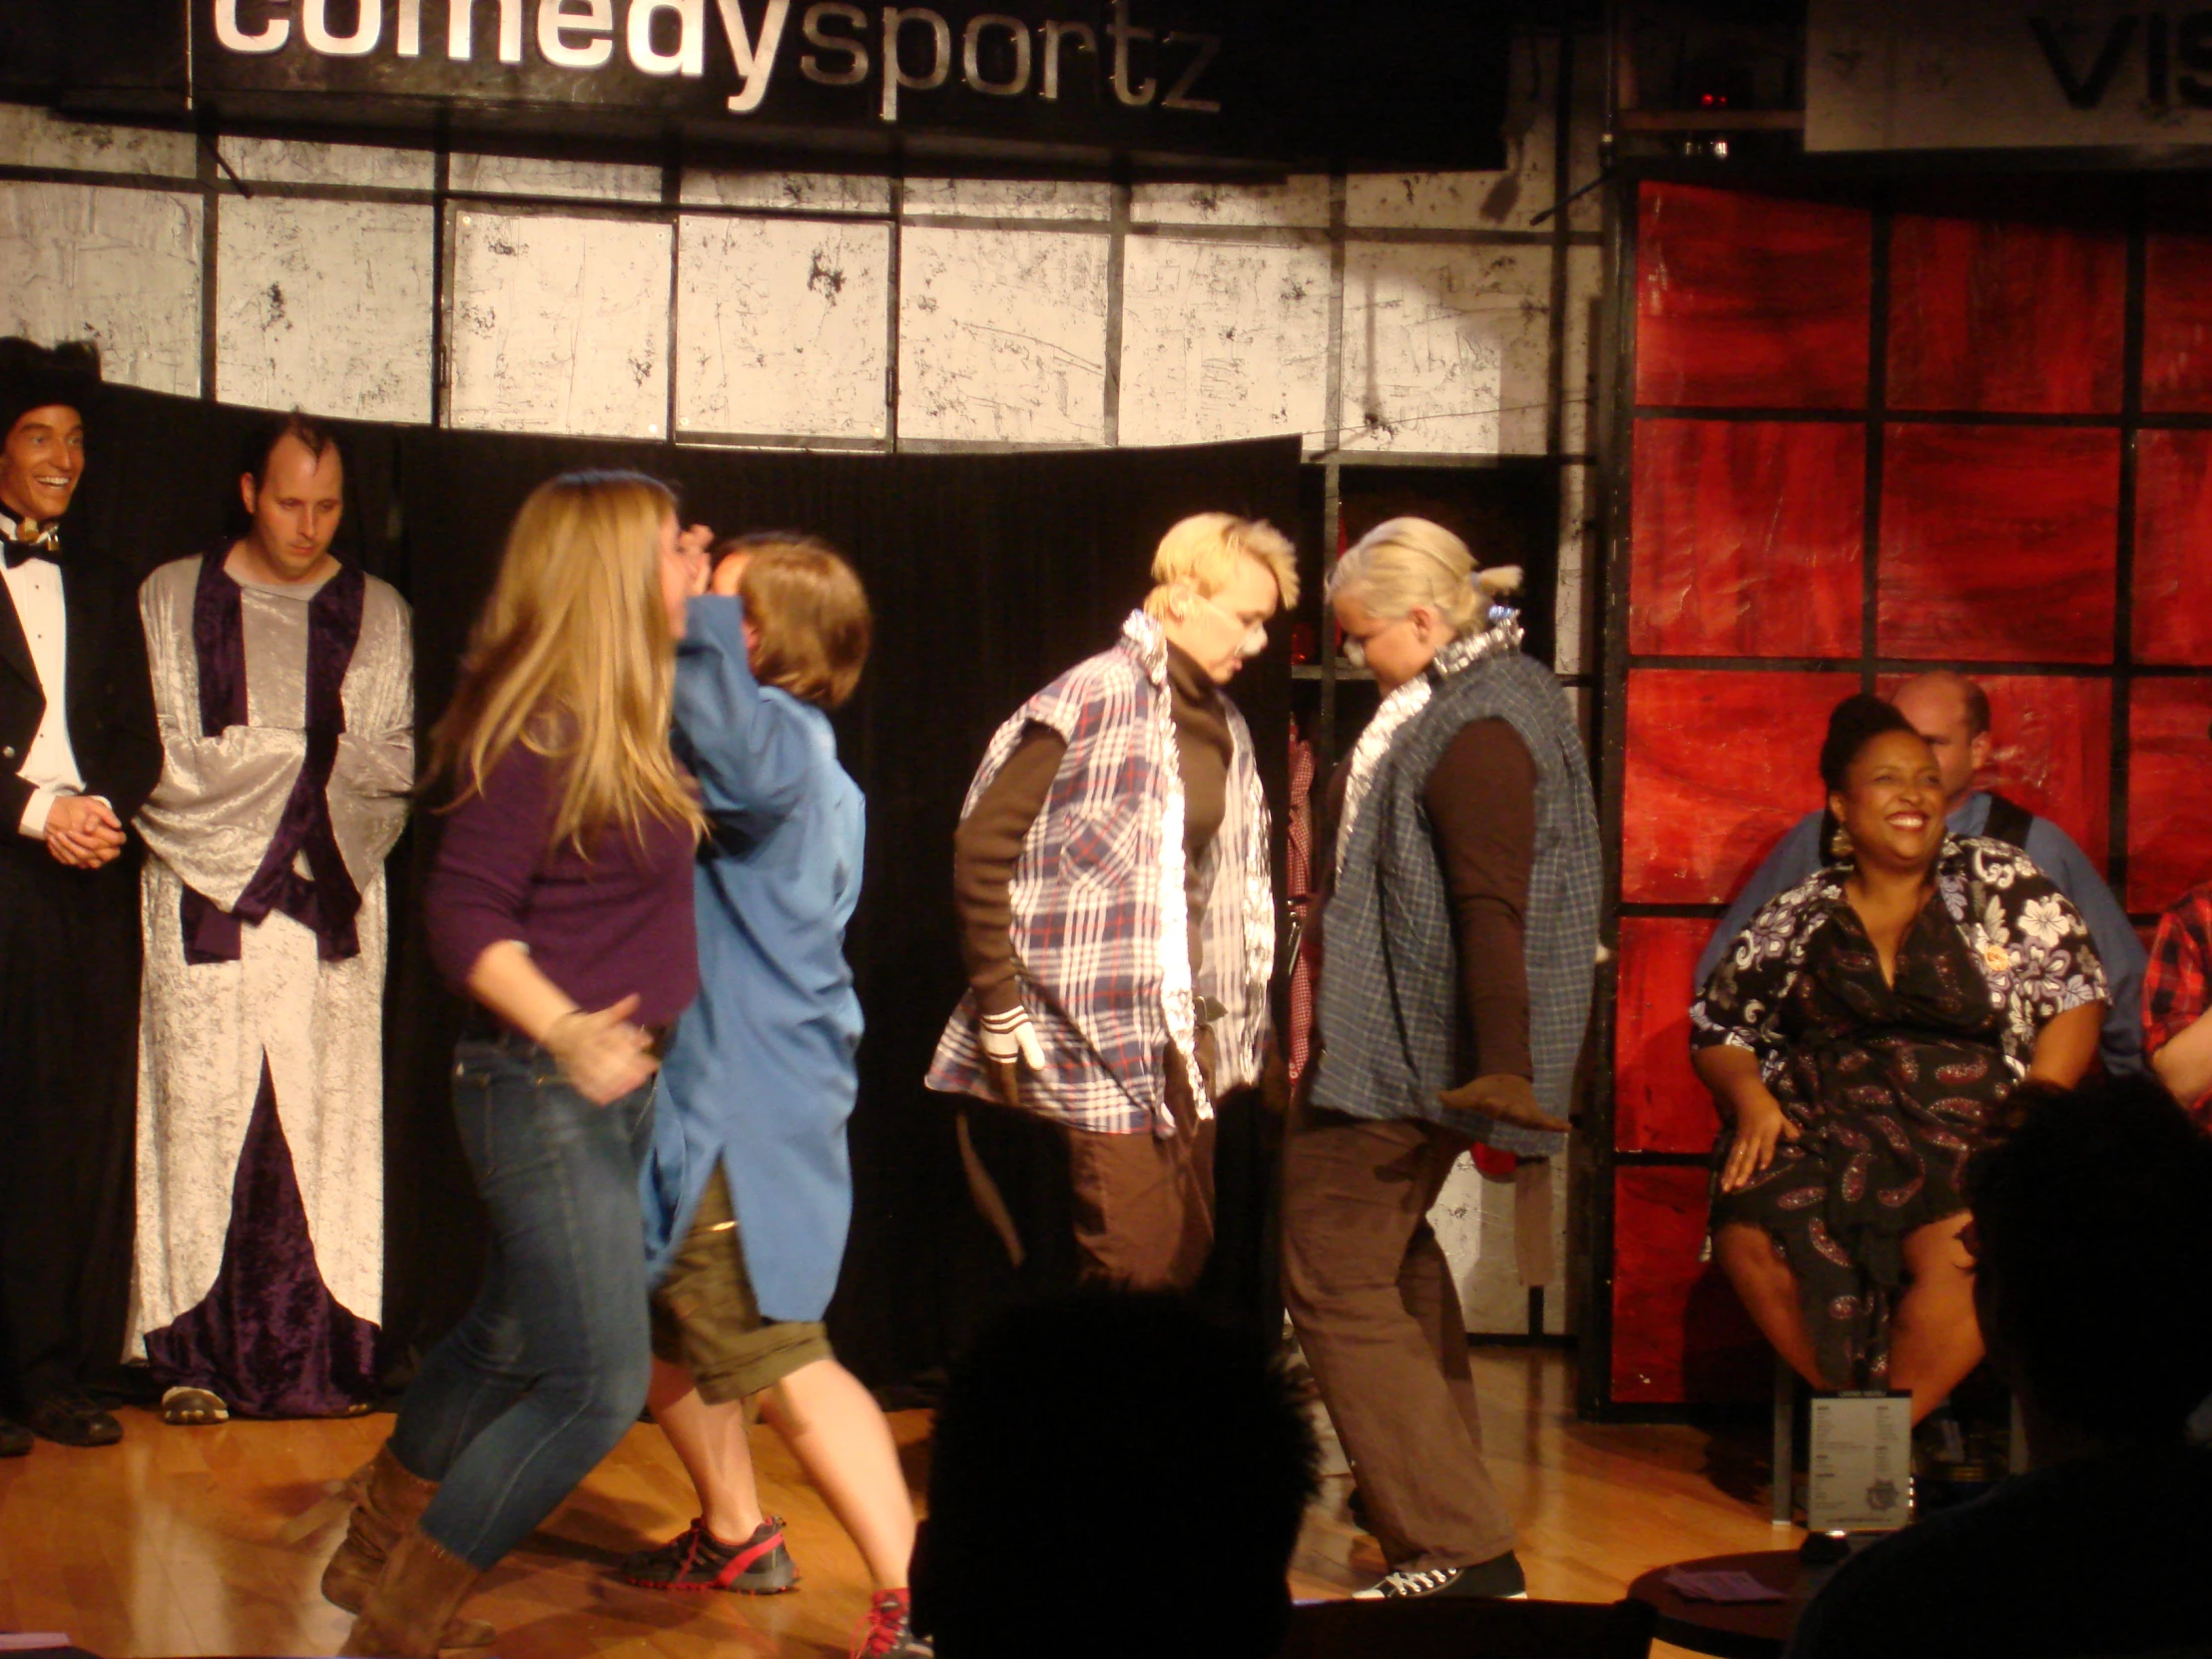 a group of people standing around on stage